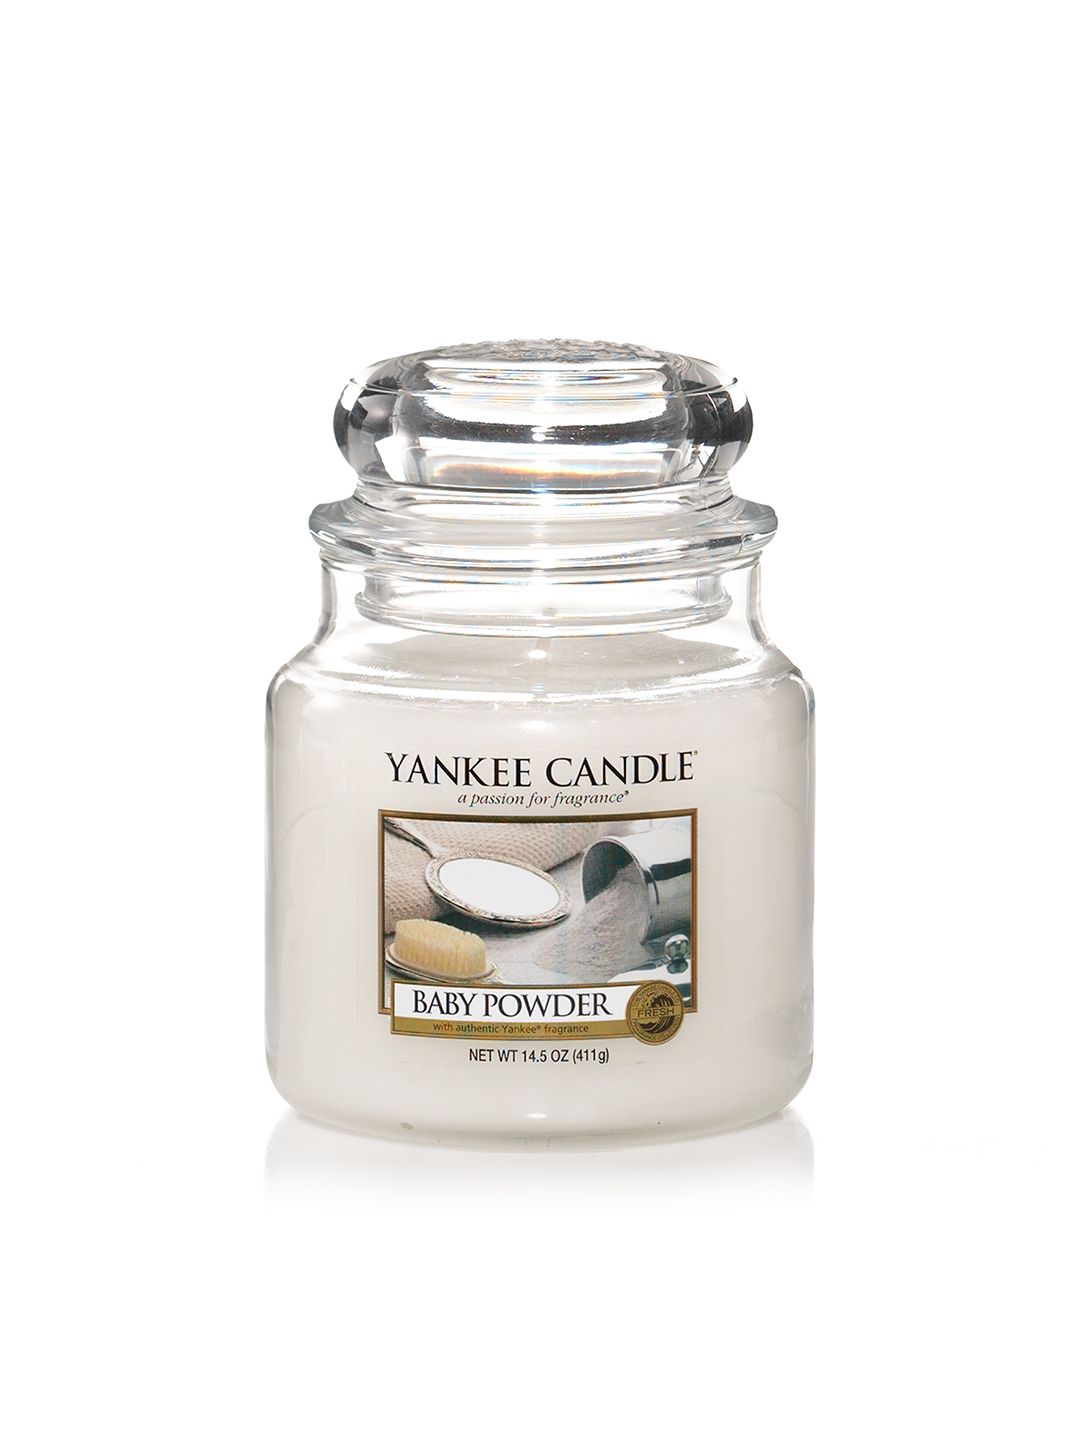 YANKEE CANDLE White Classic Medium Jar Baby Powder Scented Candles Price in India